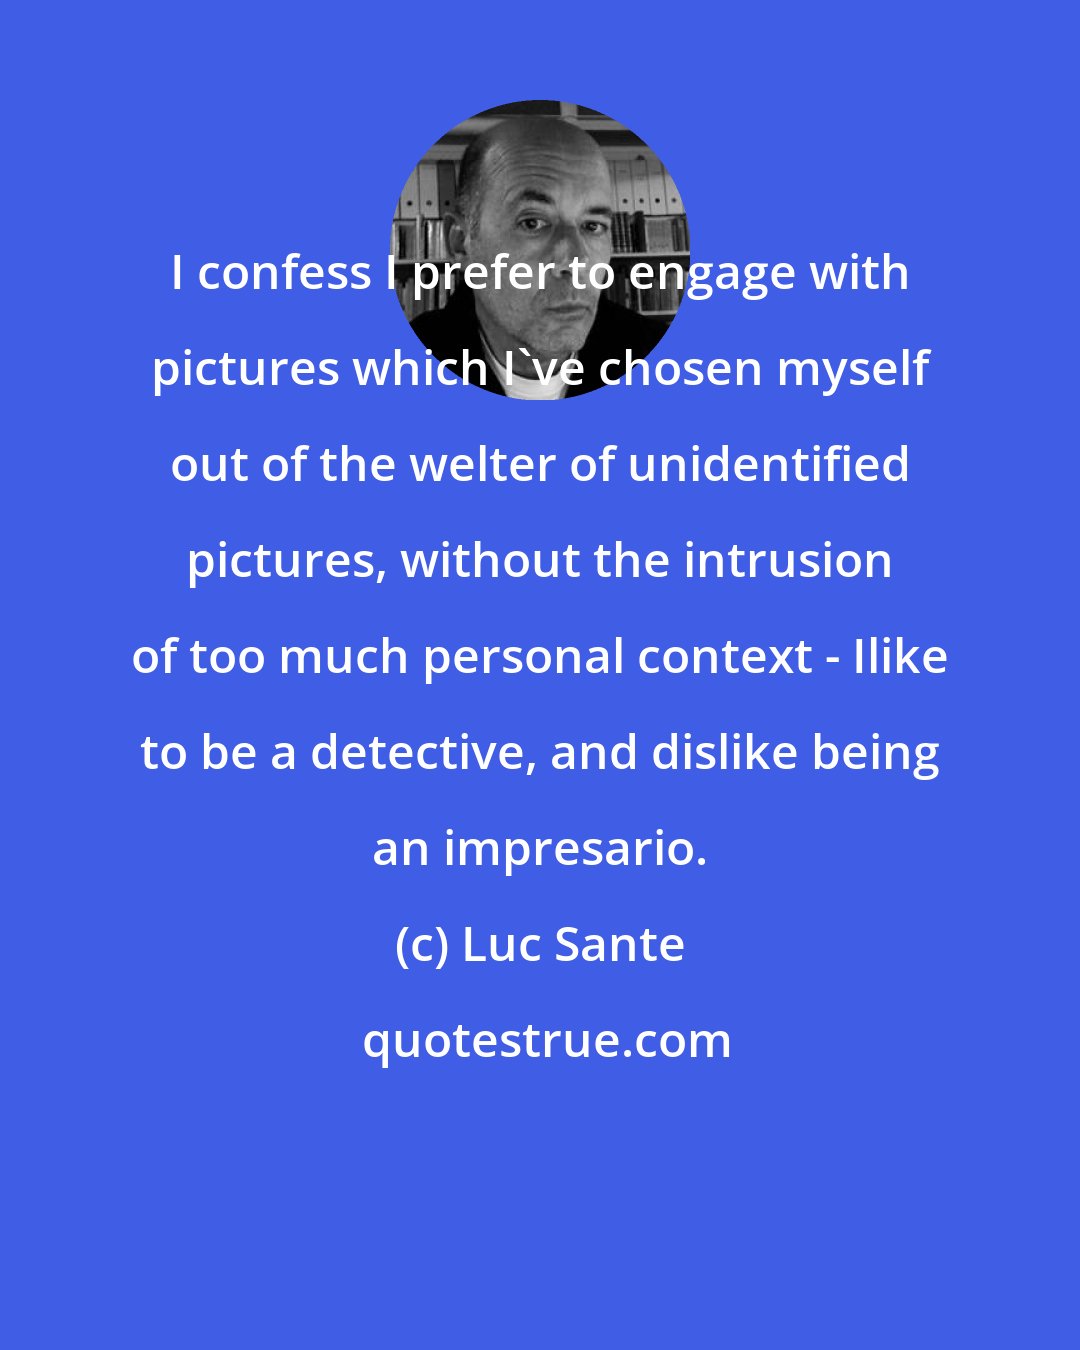 Luc Sante: I confess I prefer to engage with pictures which I've chosen myself out of the welter of unidentified pictures, without the intrusion of too much personal context - Ilike to be a detective, and dislike being an impresario.